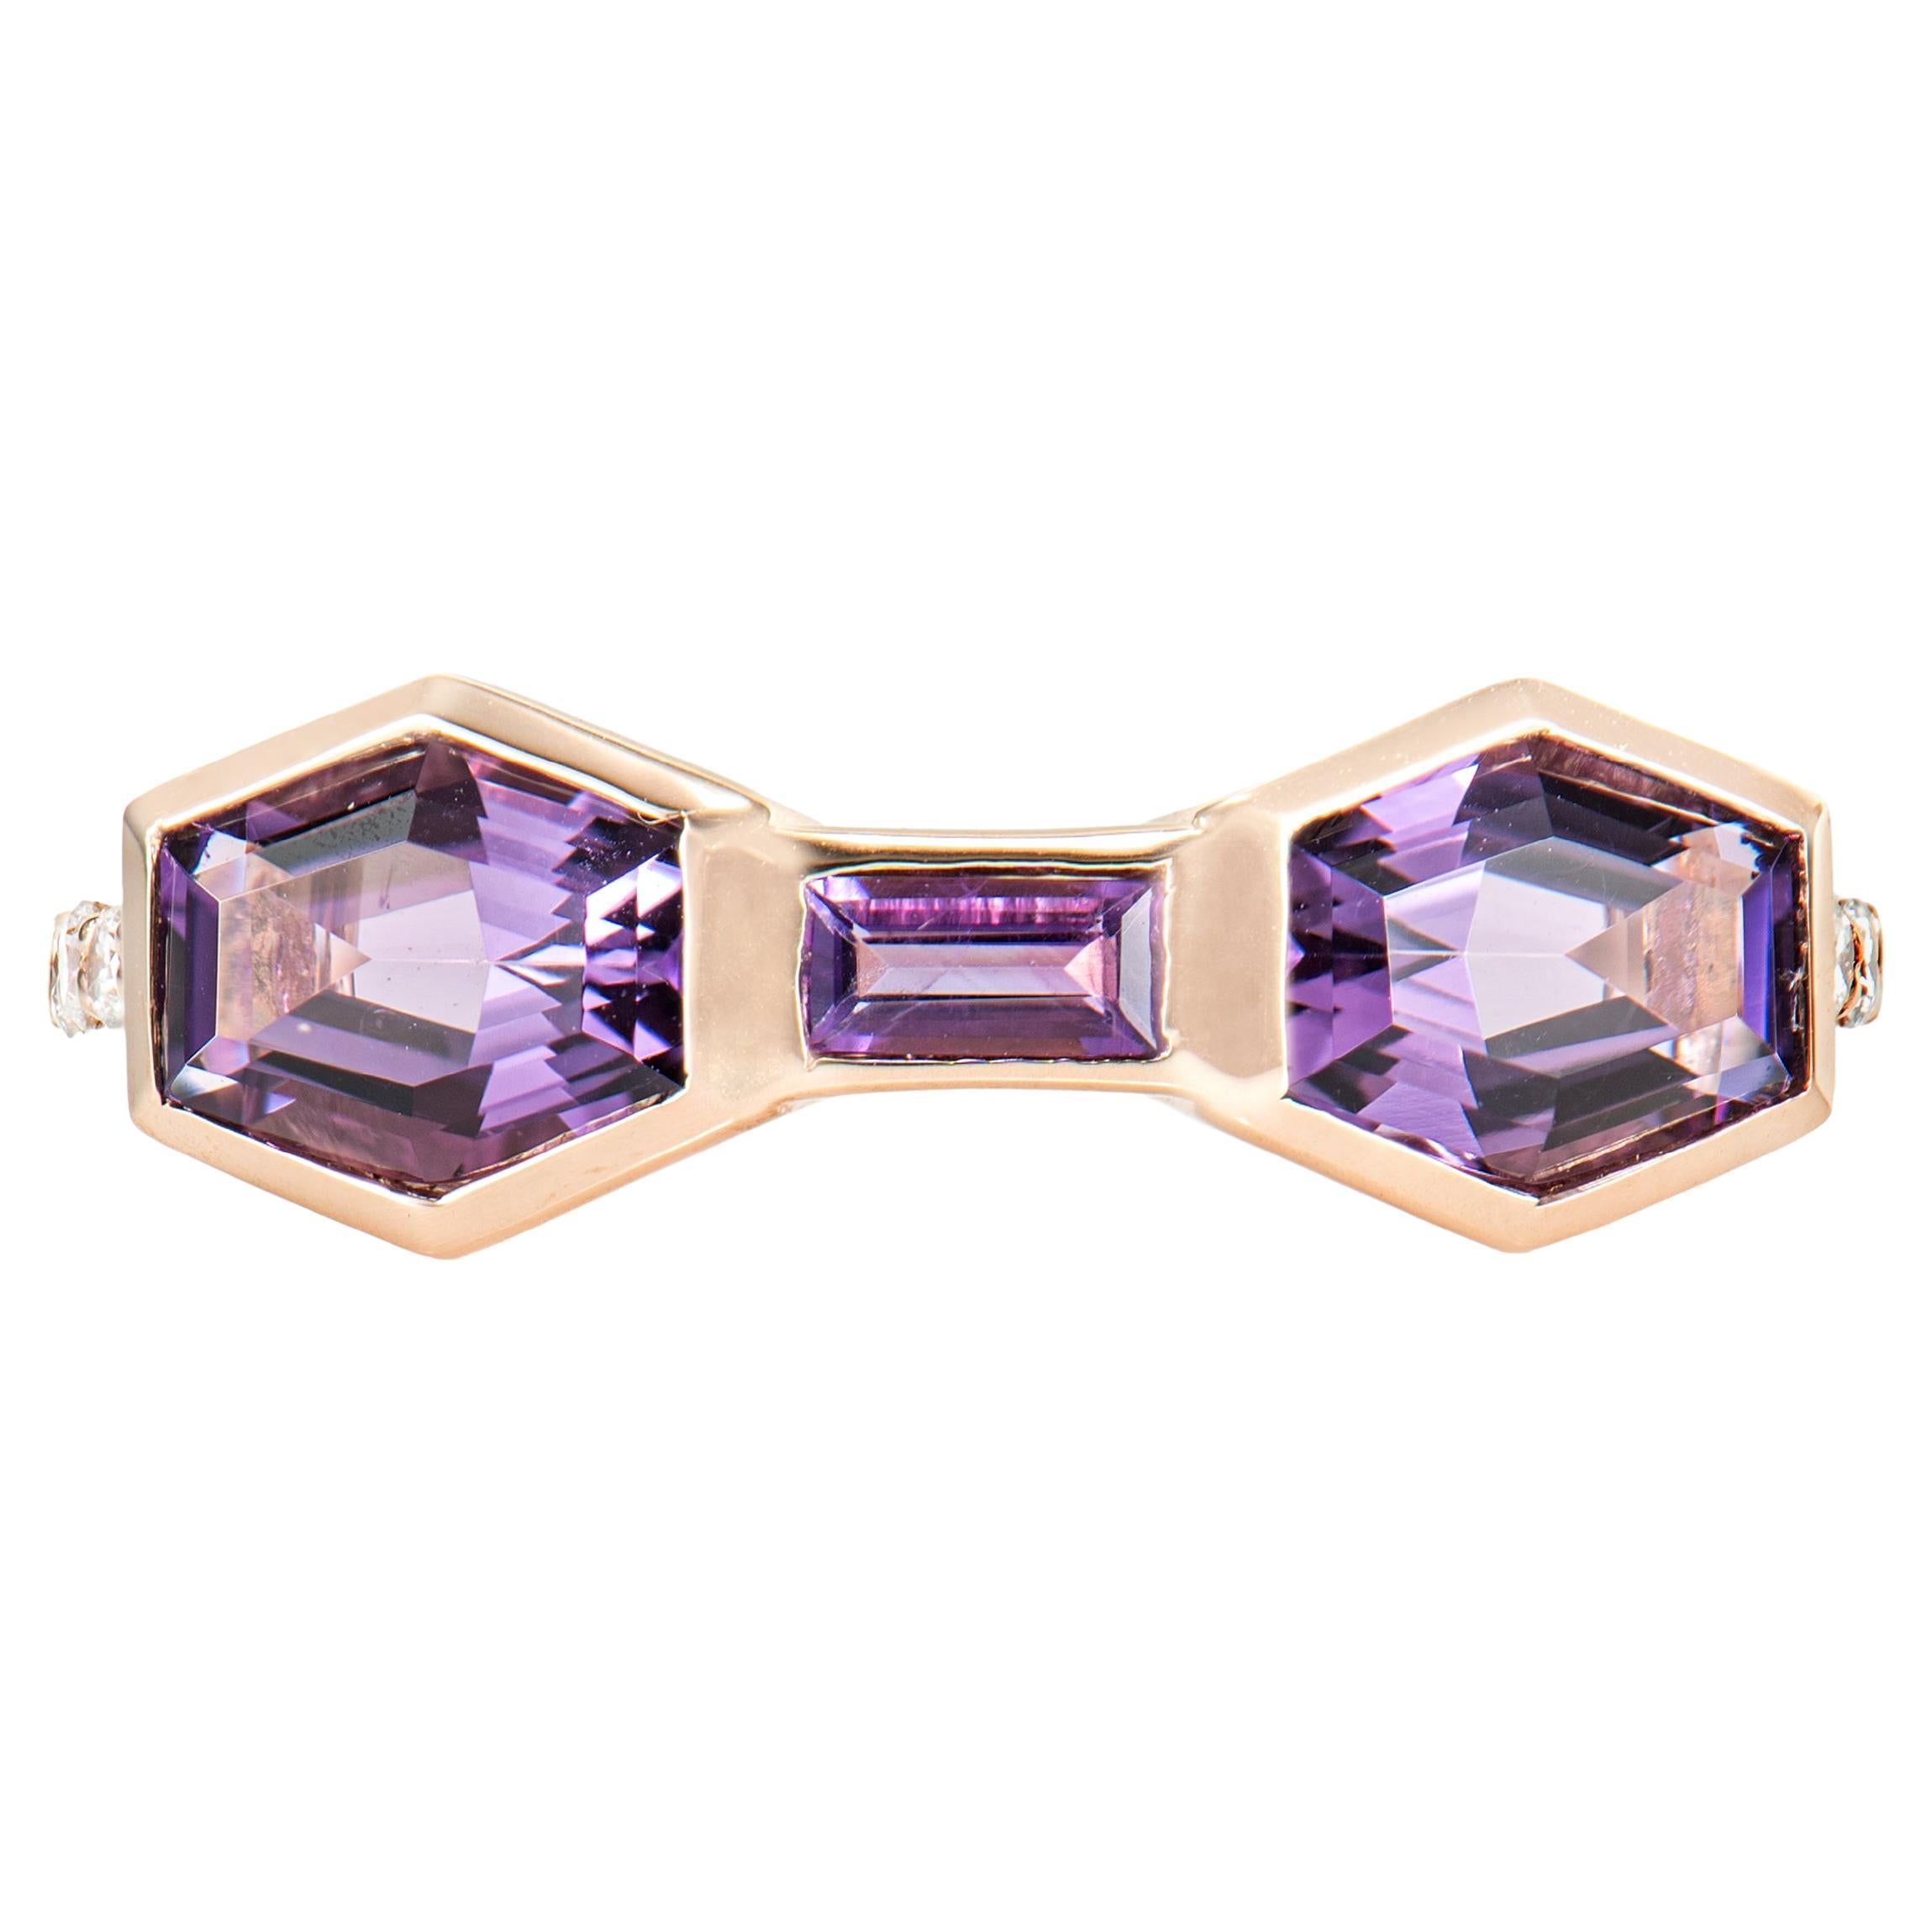 1.49 Carat Amethyst Fancy Ring in 14Karat Rose Gold with Diamond. For Sale